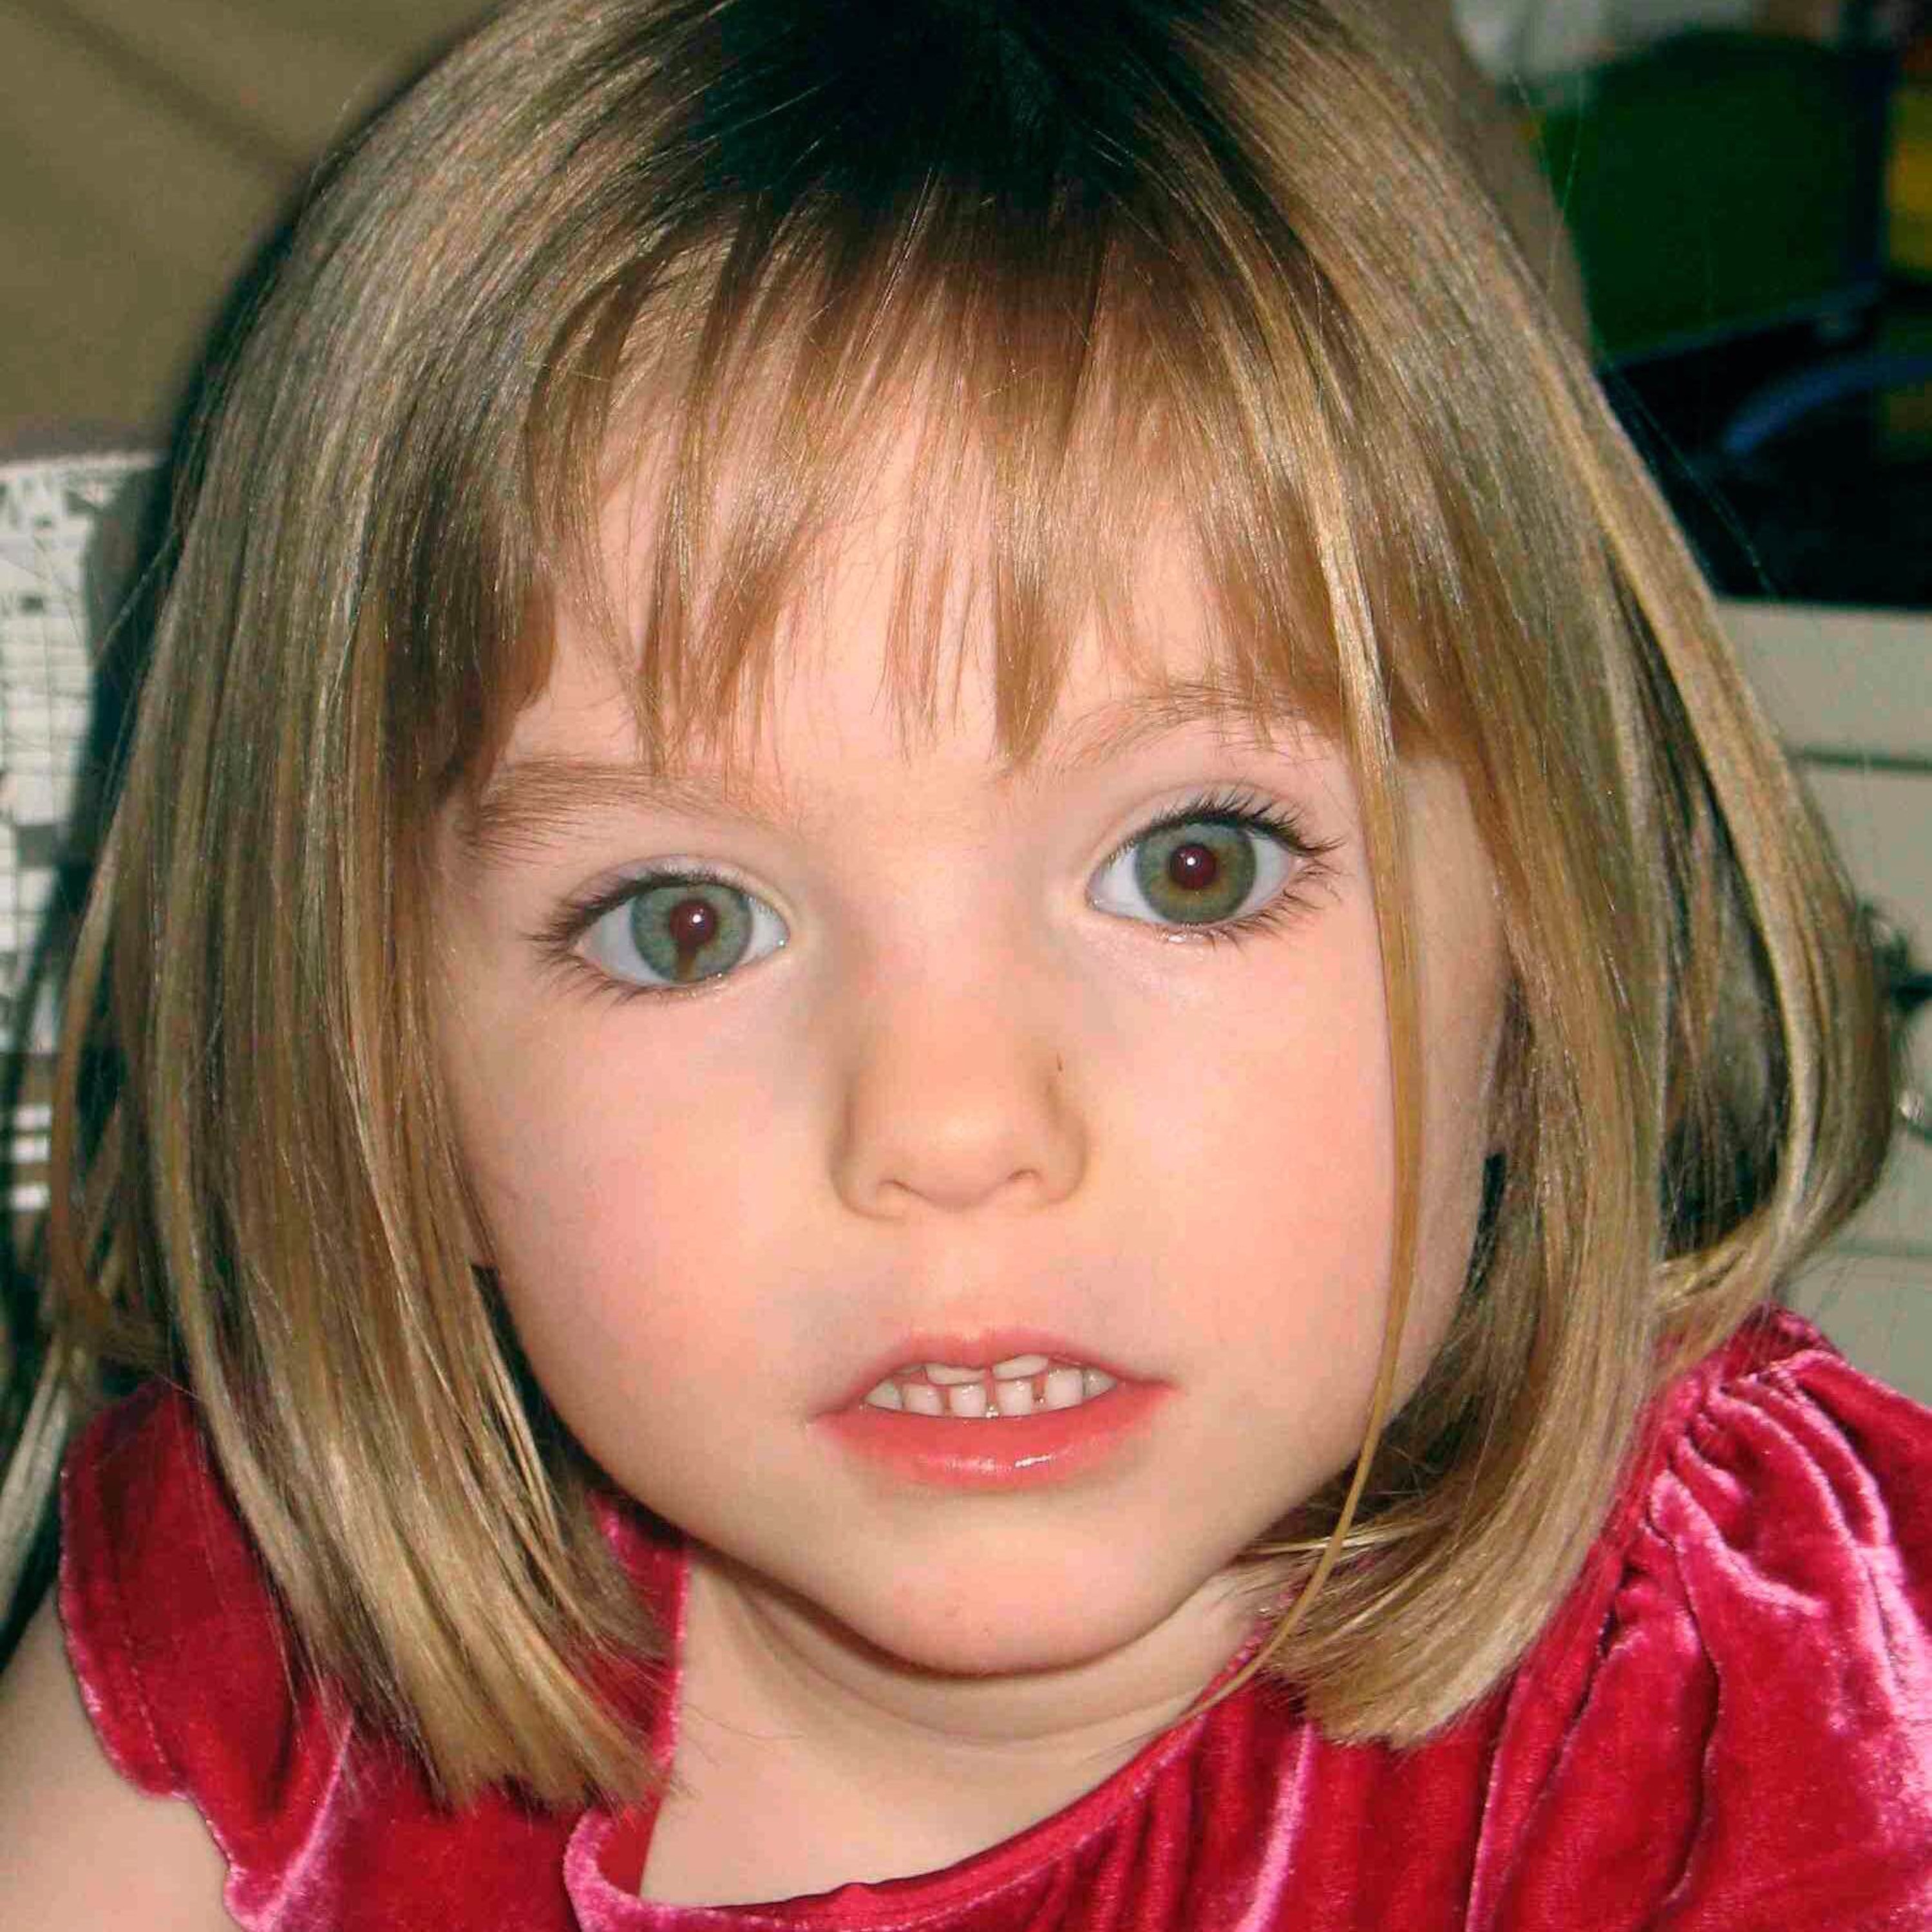 The Unraveling Mystery: The Madeline McCann Case